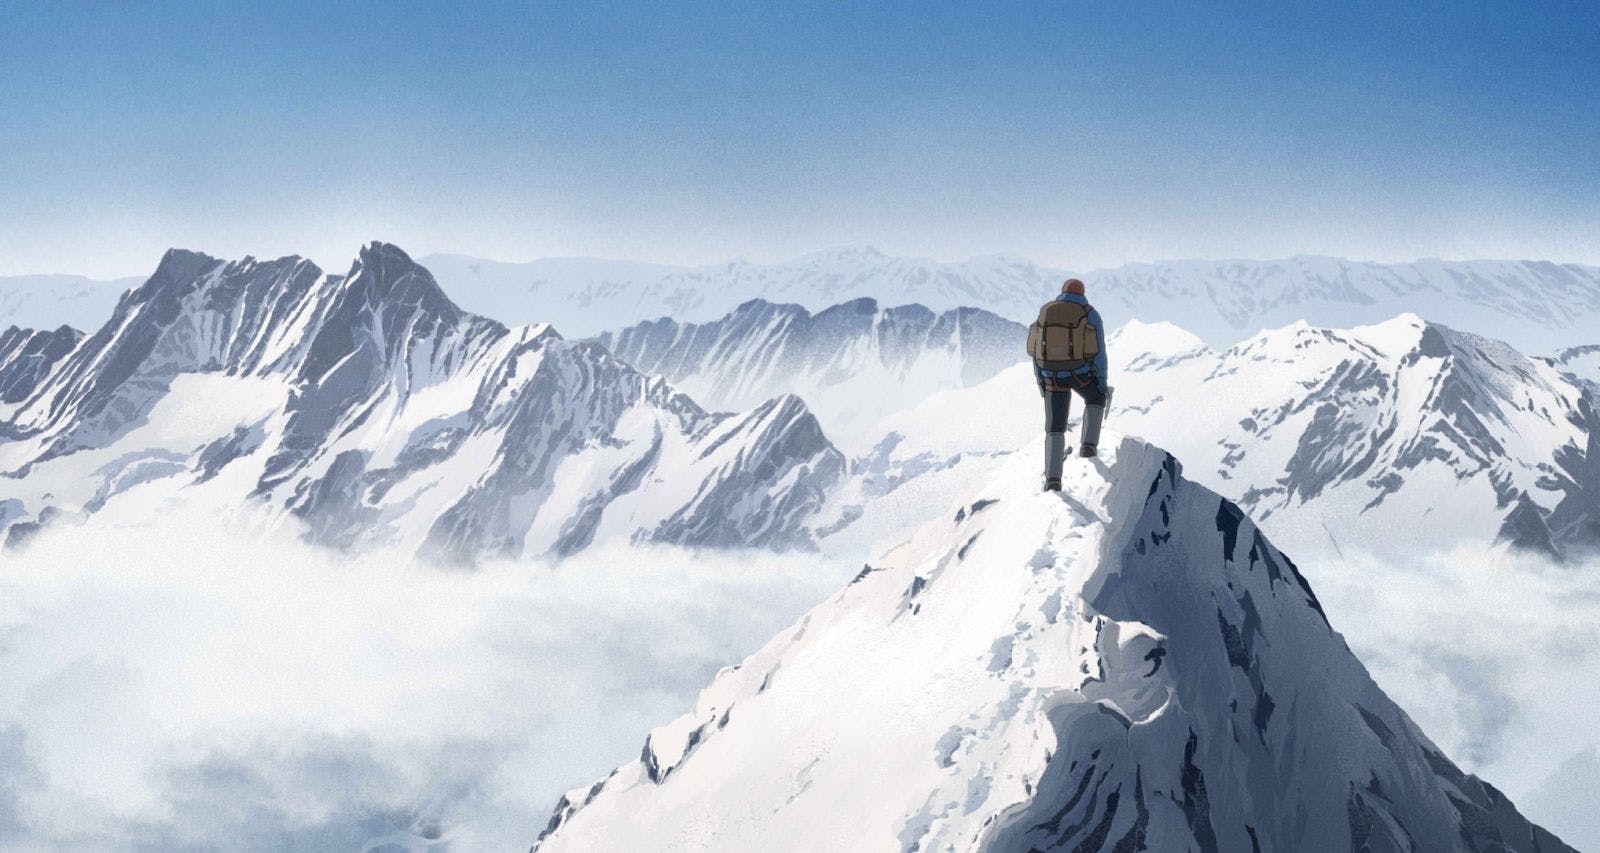 A lone figure stands at the peak of a snow-capped mountain